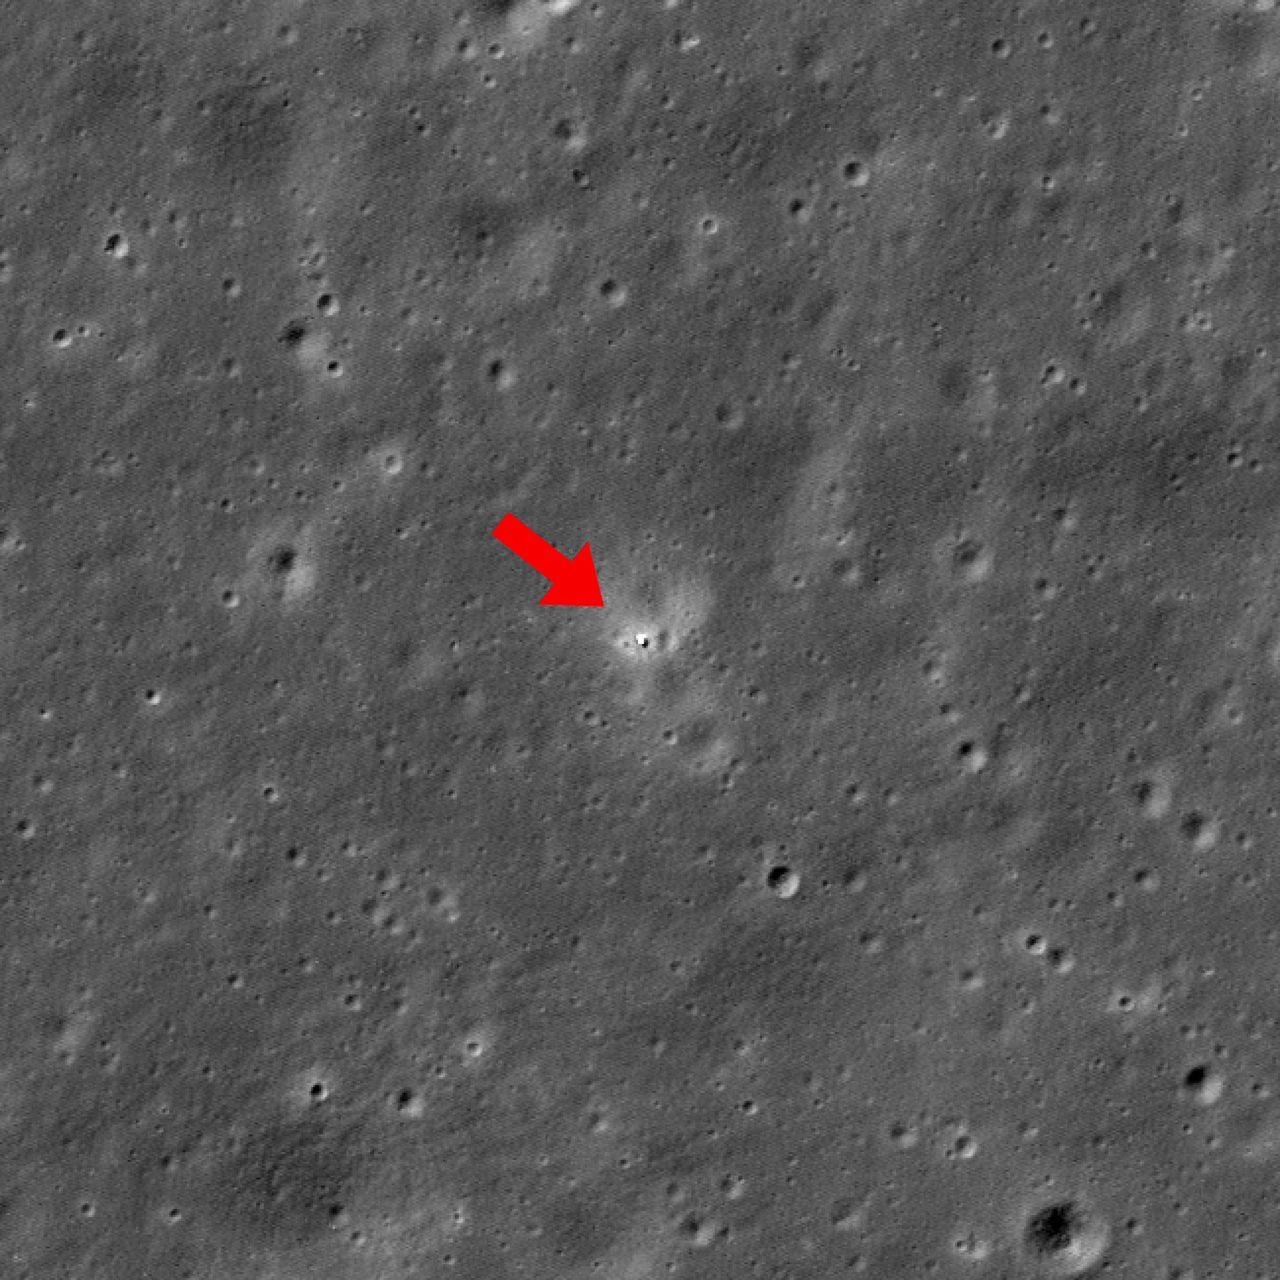 China's Chang’e 6 captured on the lunar far side by NASA orbiter